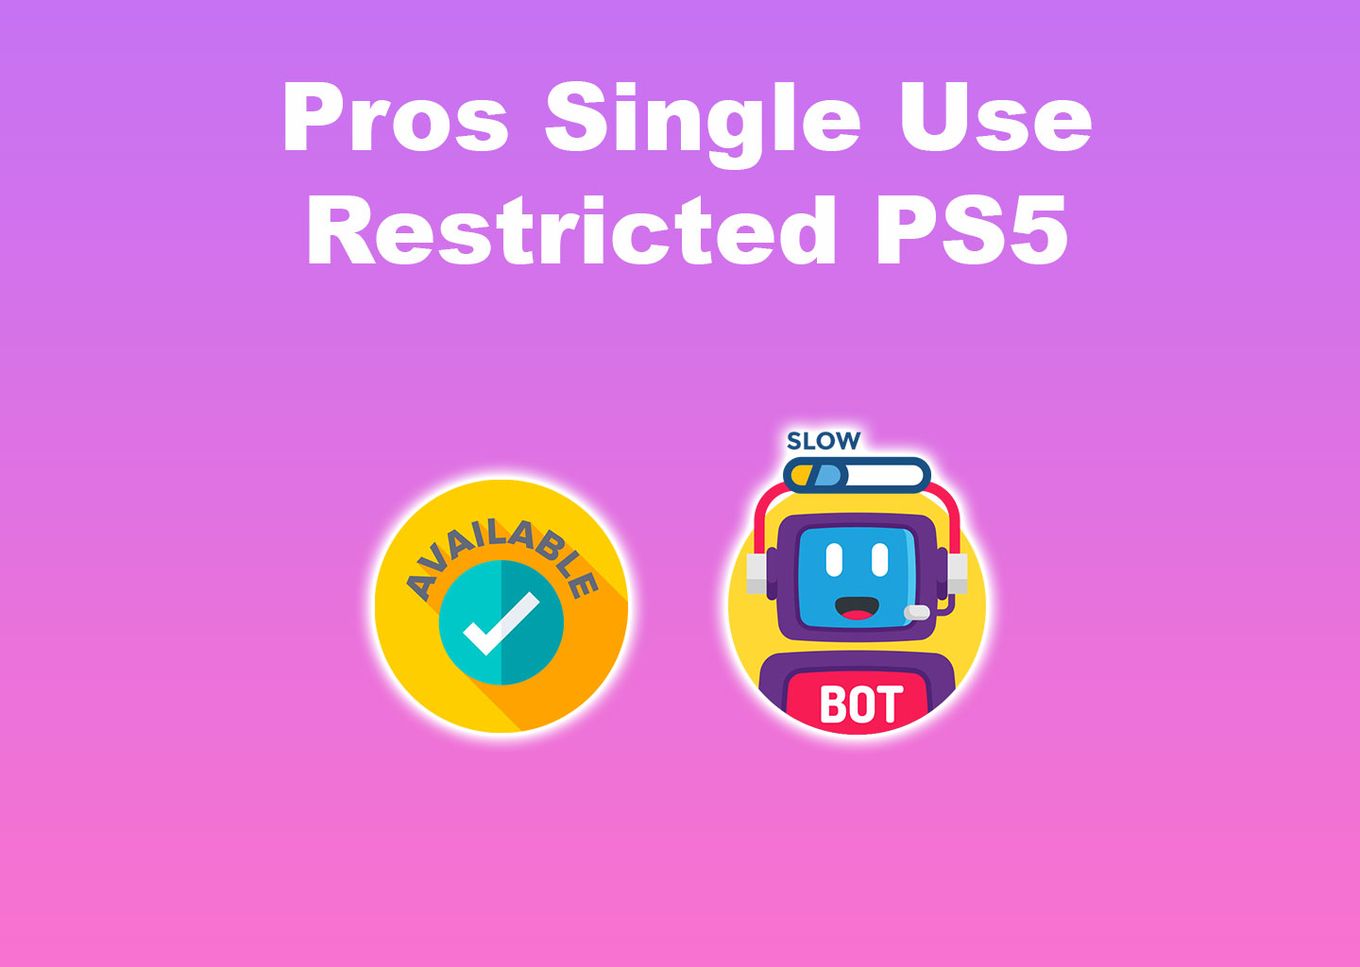 The Pros Of Single Use Restricted PS5